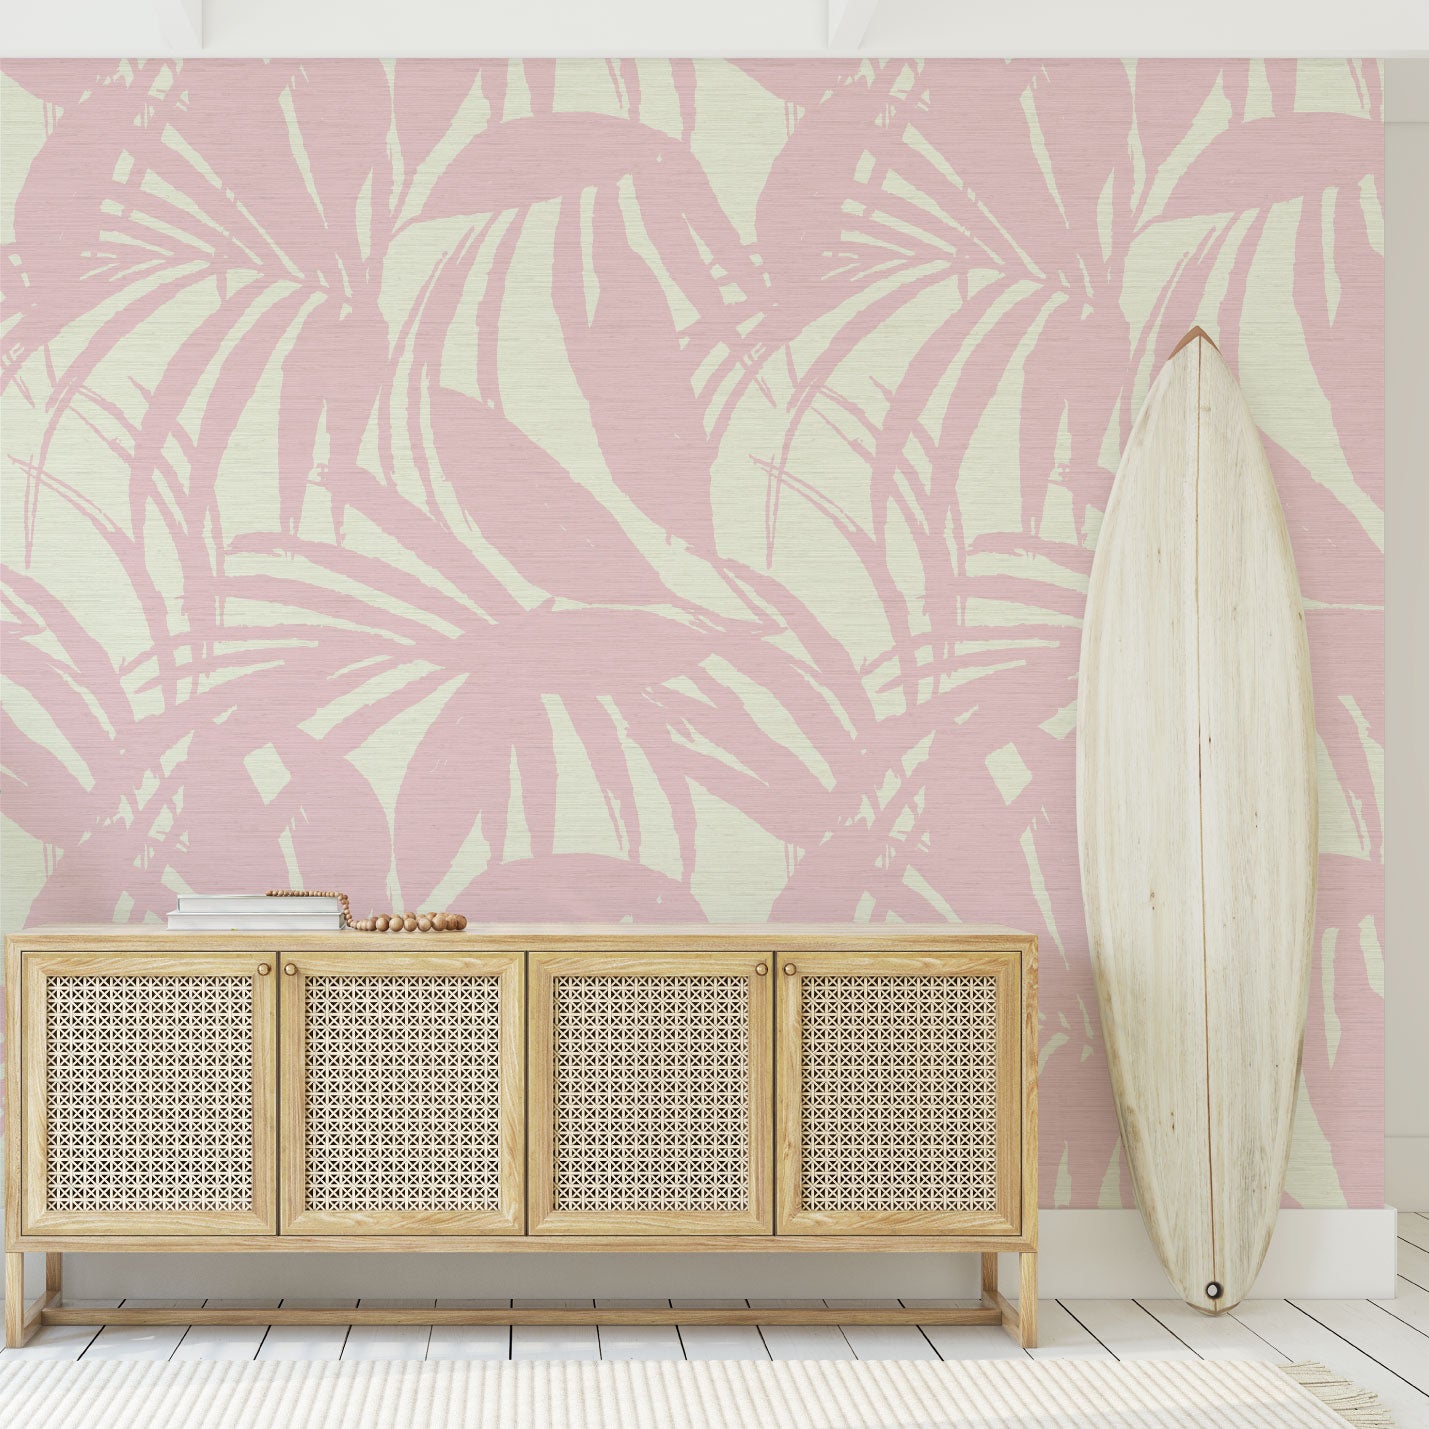 printed grasscloth wallpaper in oversized two color tropical leaf print.